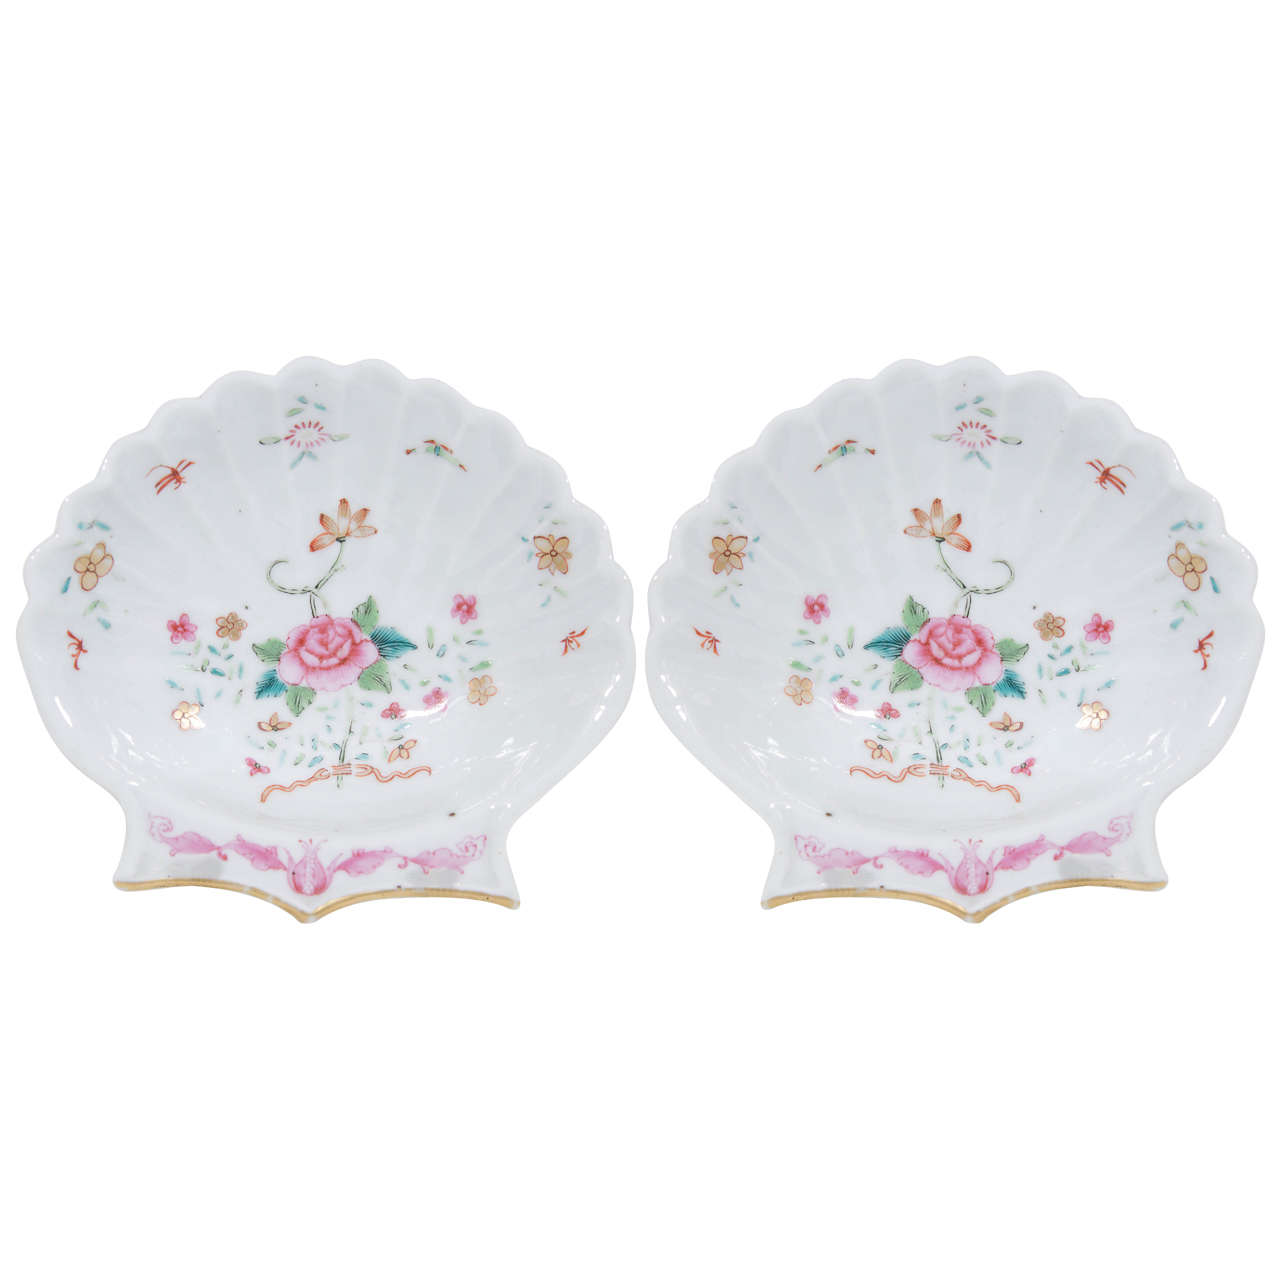 Pair of Small Chinese Famille Rose Porcelain Shell Dishes Made circa 1785